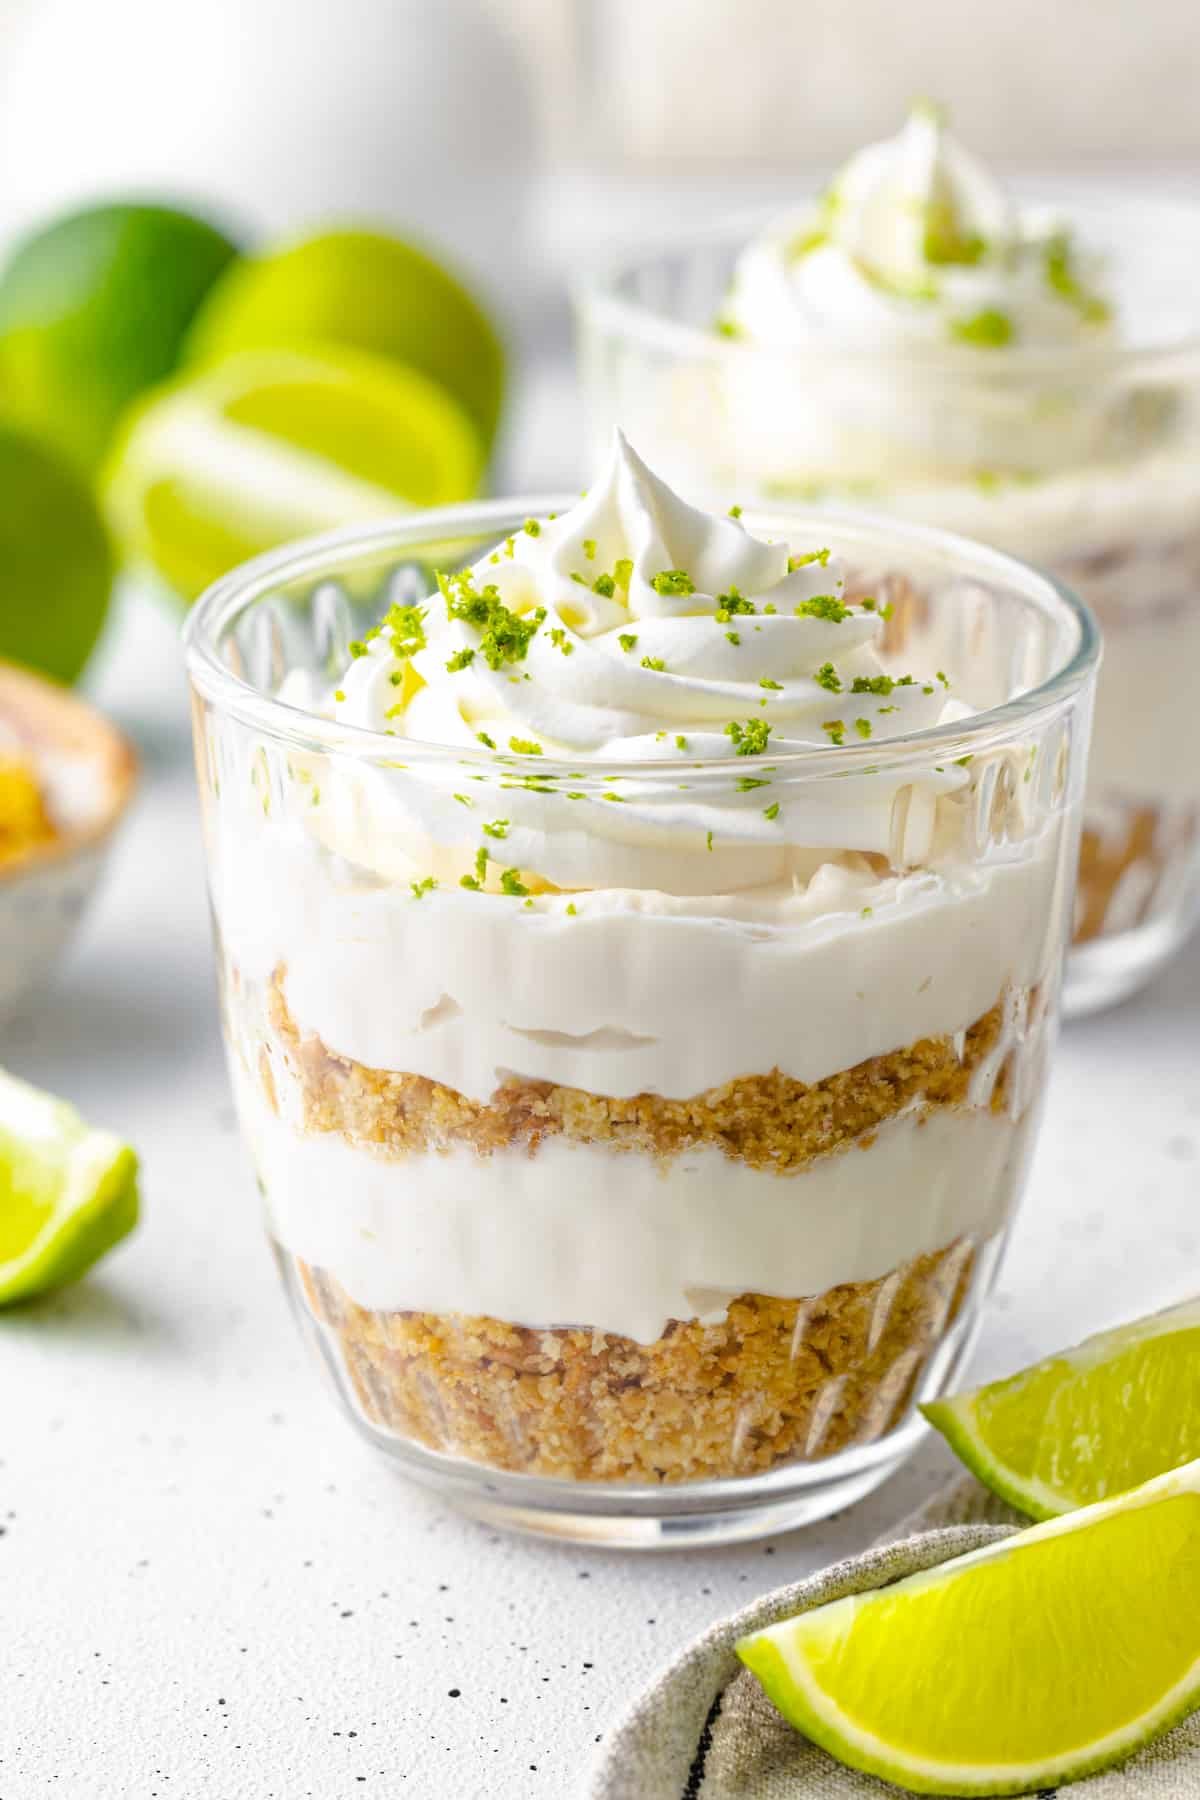 Key Lime Dessert with Zest and Cream